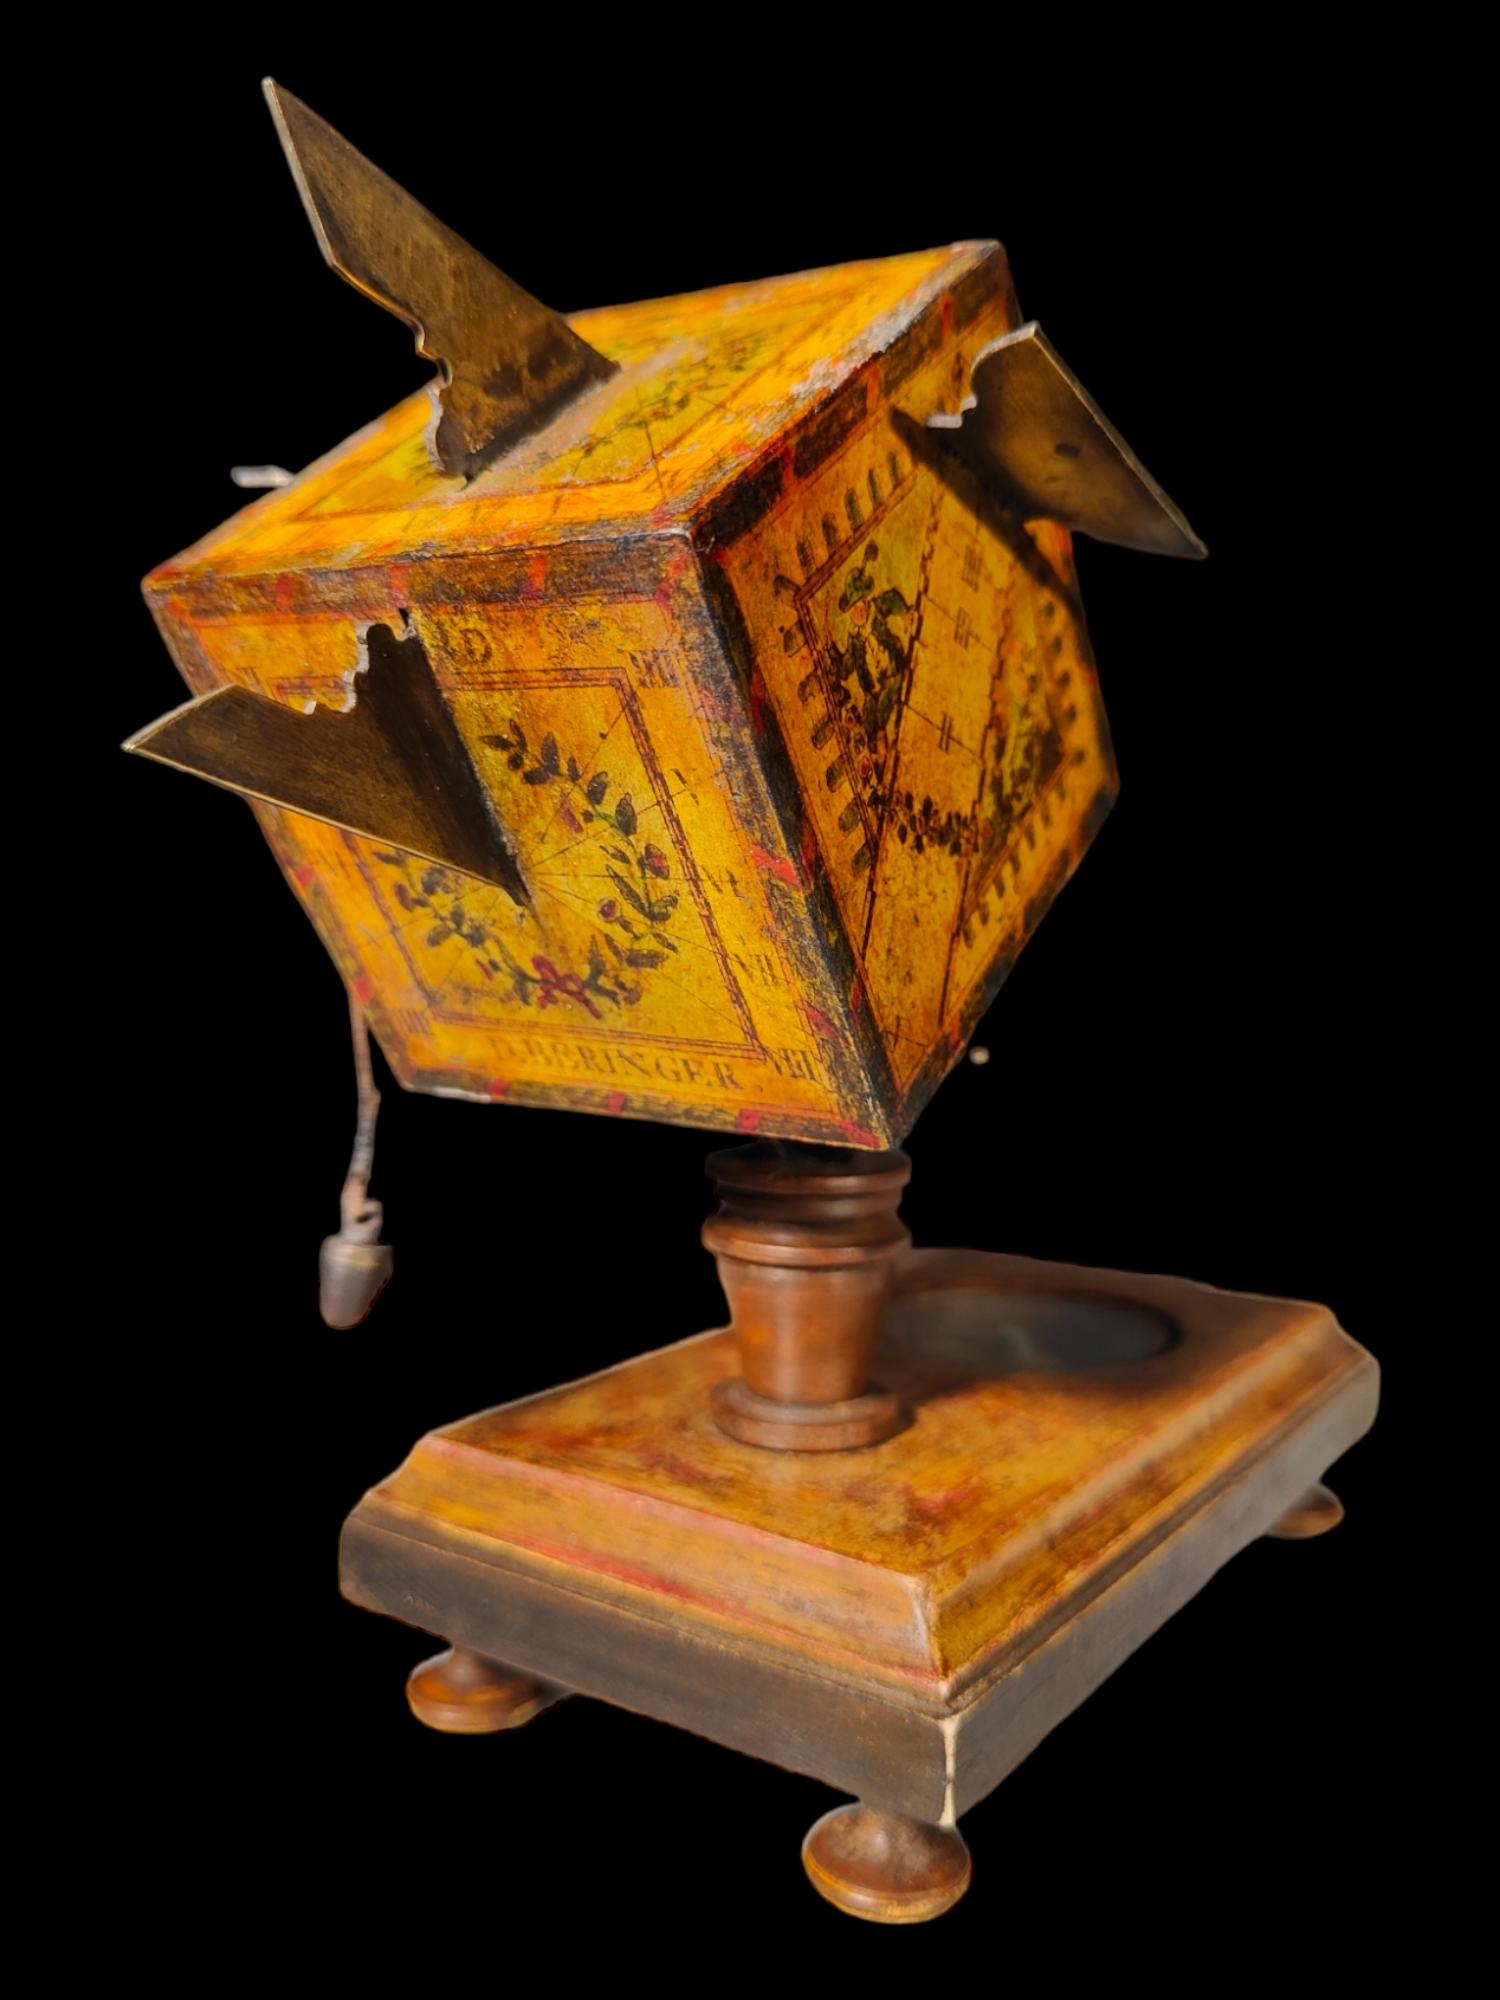 Portable cube sundial David Beringer circa 1780–1821
Beringer is best known for portable wooden sundials with scales printed on paper glued to the wood. These included cube dials and diptych dials.Some of Beringer's sundials were collaborations